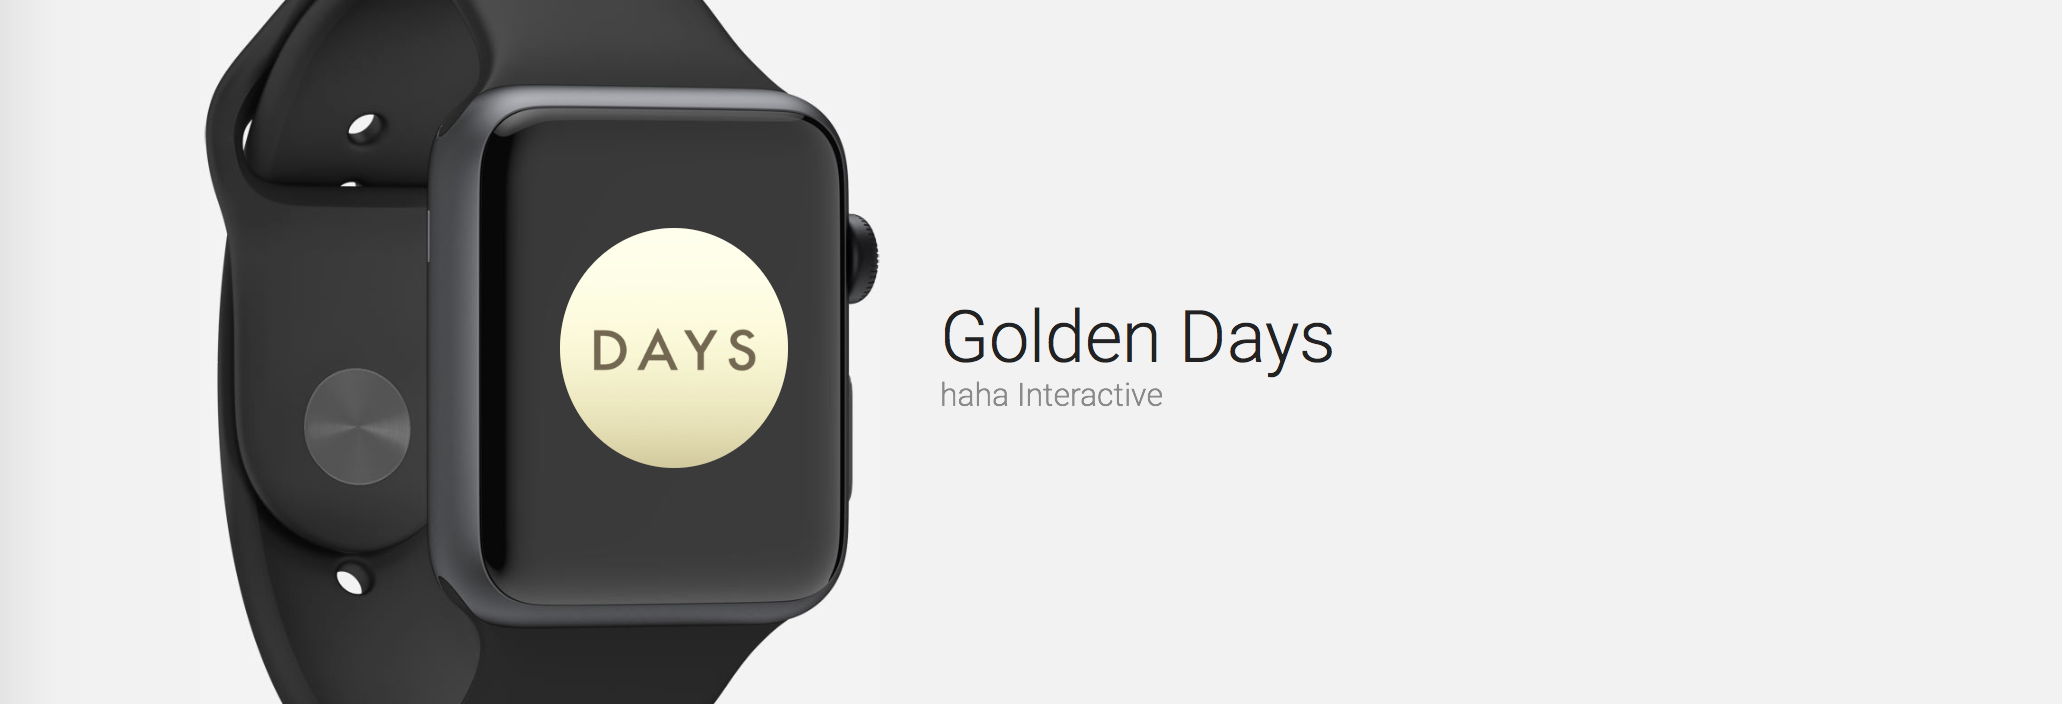 Count down to important dates on your Apple Watch with Golden Days